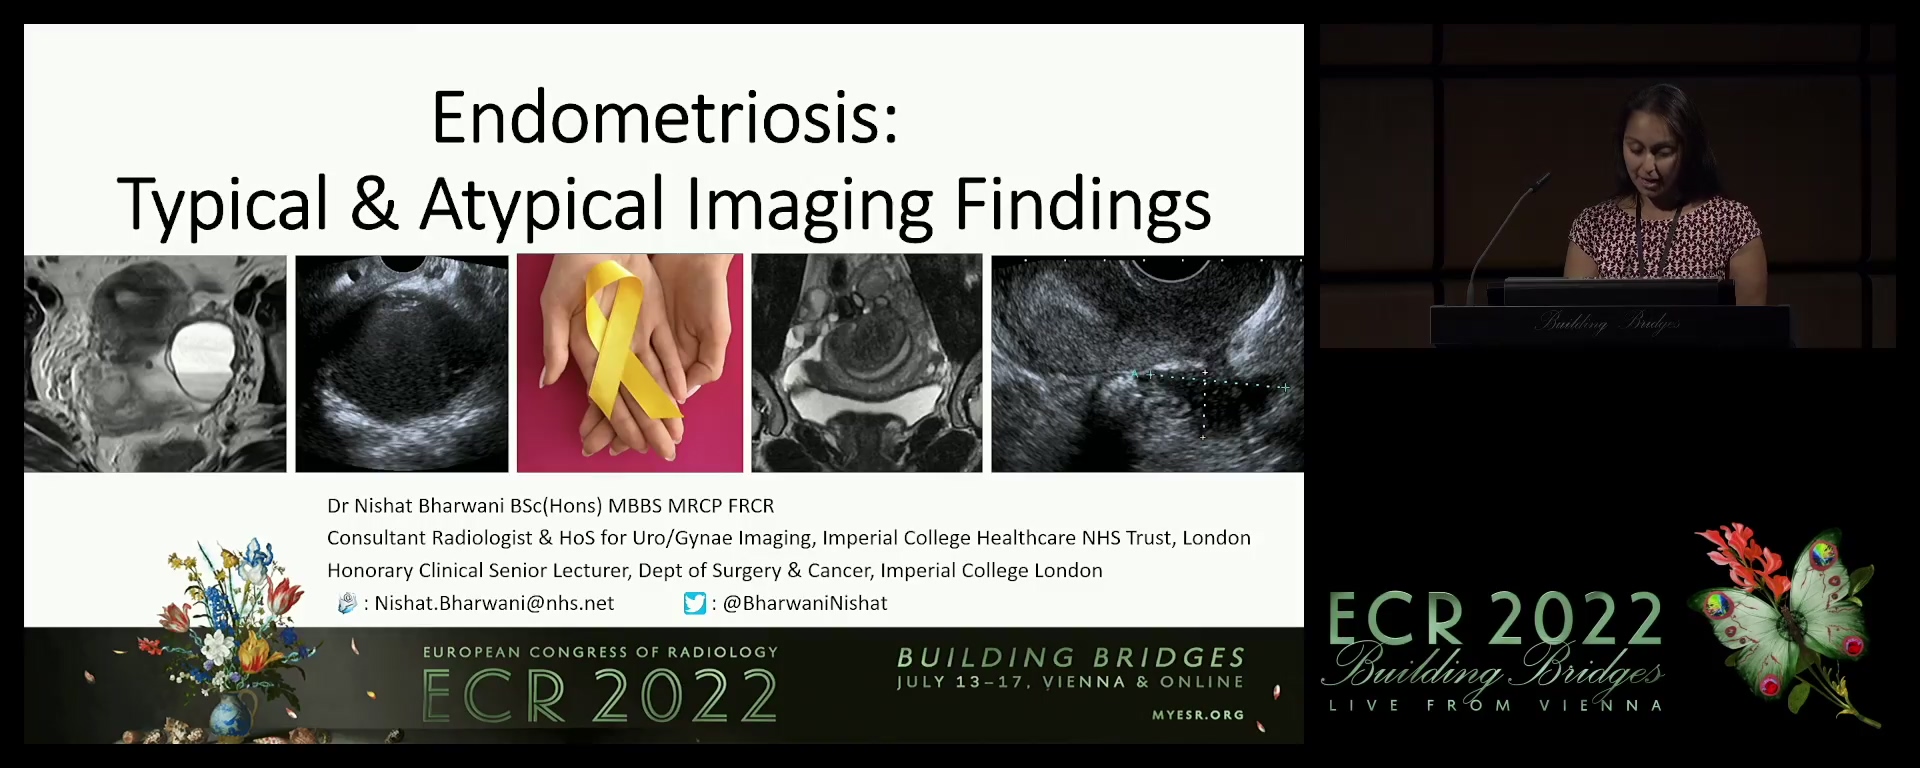 Endometriosis: typical and atypical imaging findings